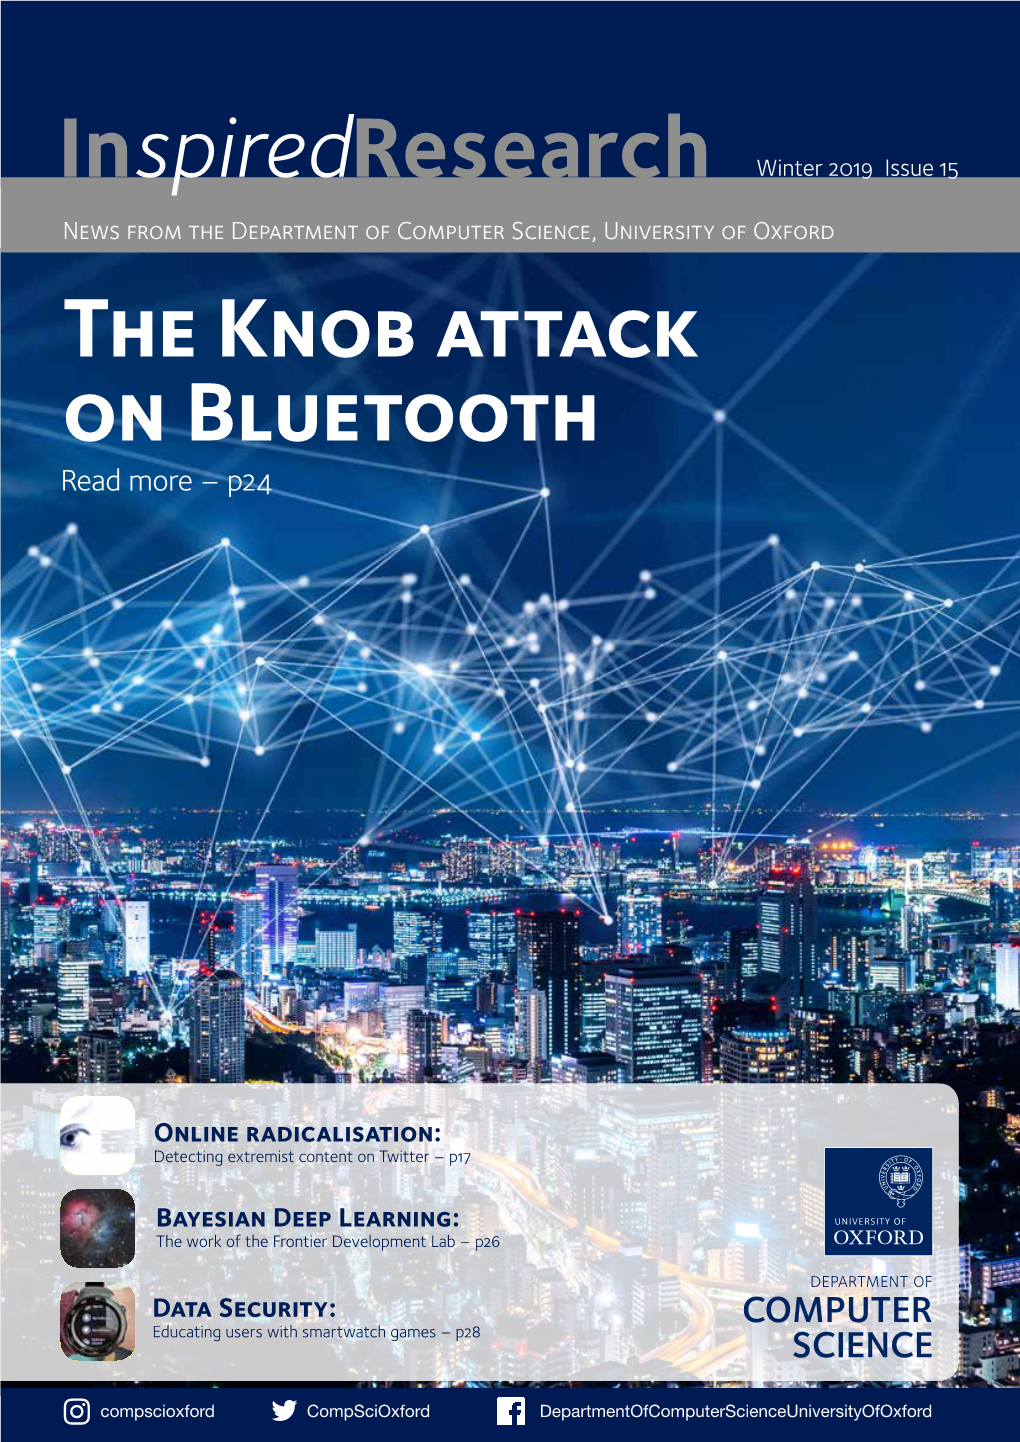 Inspiredresearch Winter 2019 Issue 15 News from the Department of Computer Science, University of Oxford the Knob Attack on Bluetooth Read More – P24